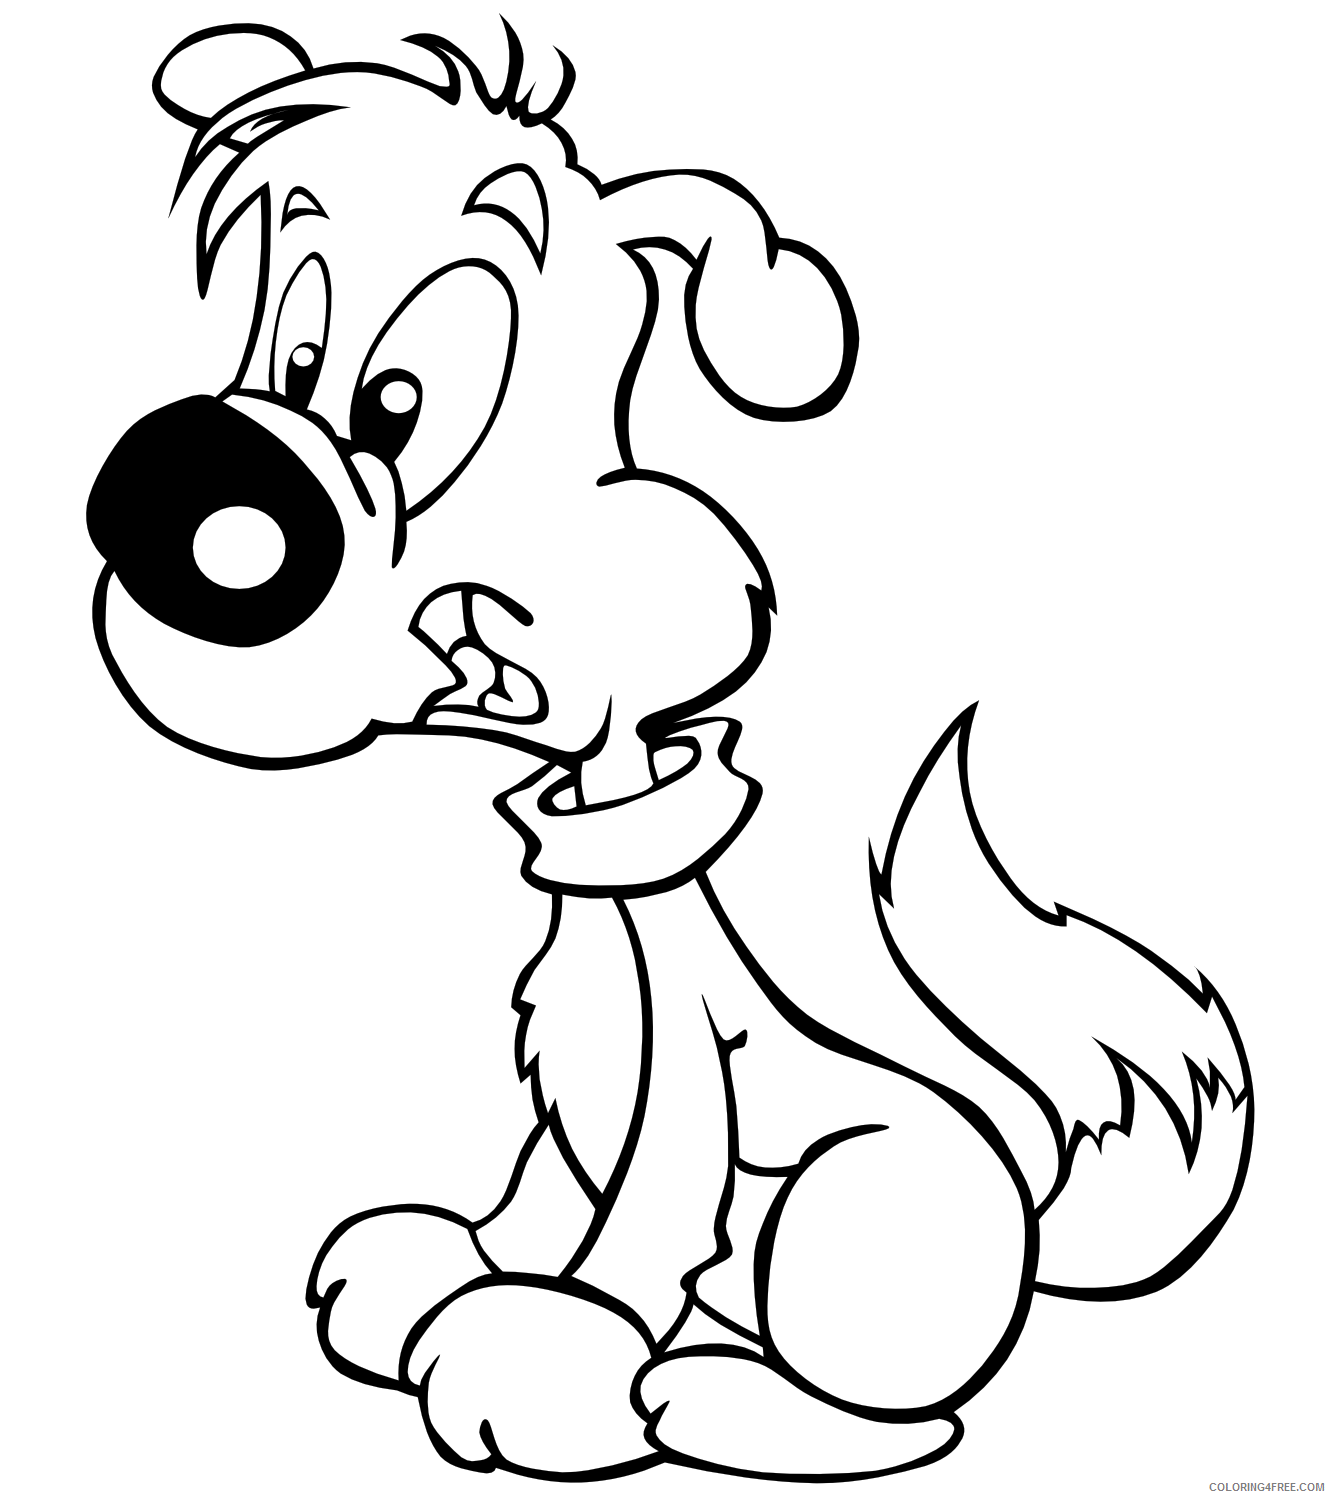 Puppy Outline Coloring Pages puppy cartoon free that Printable Coloring4free